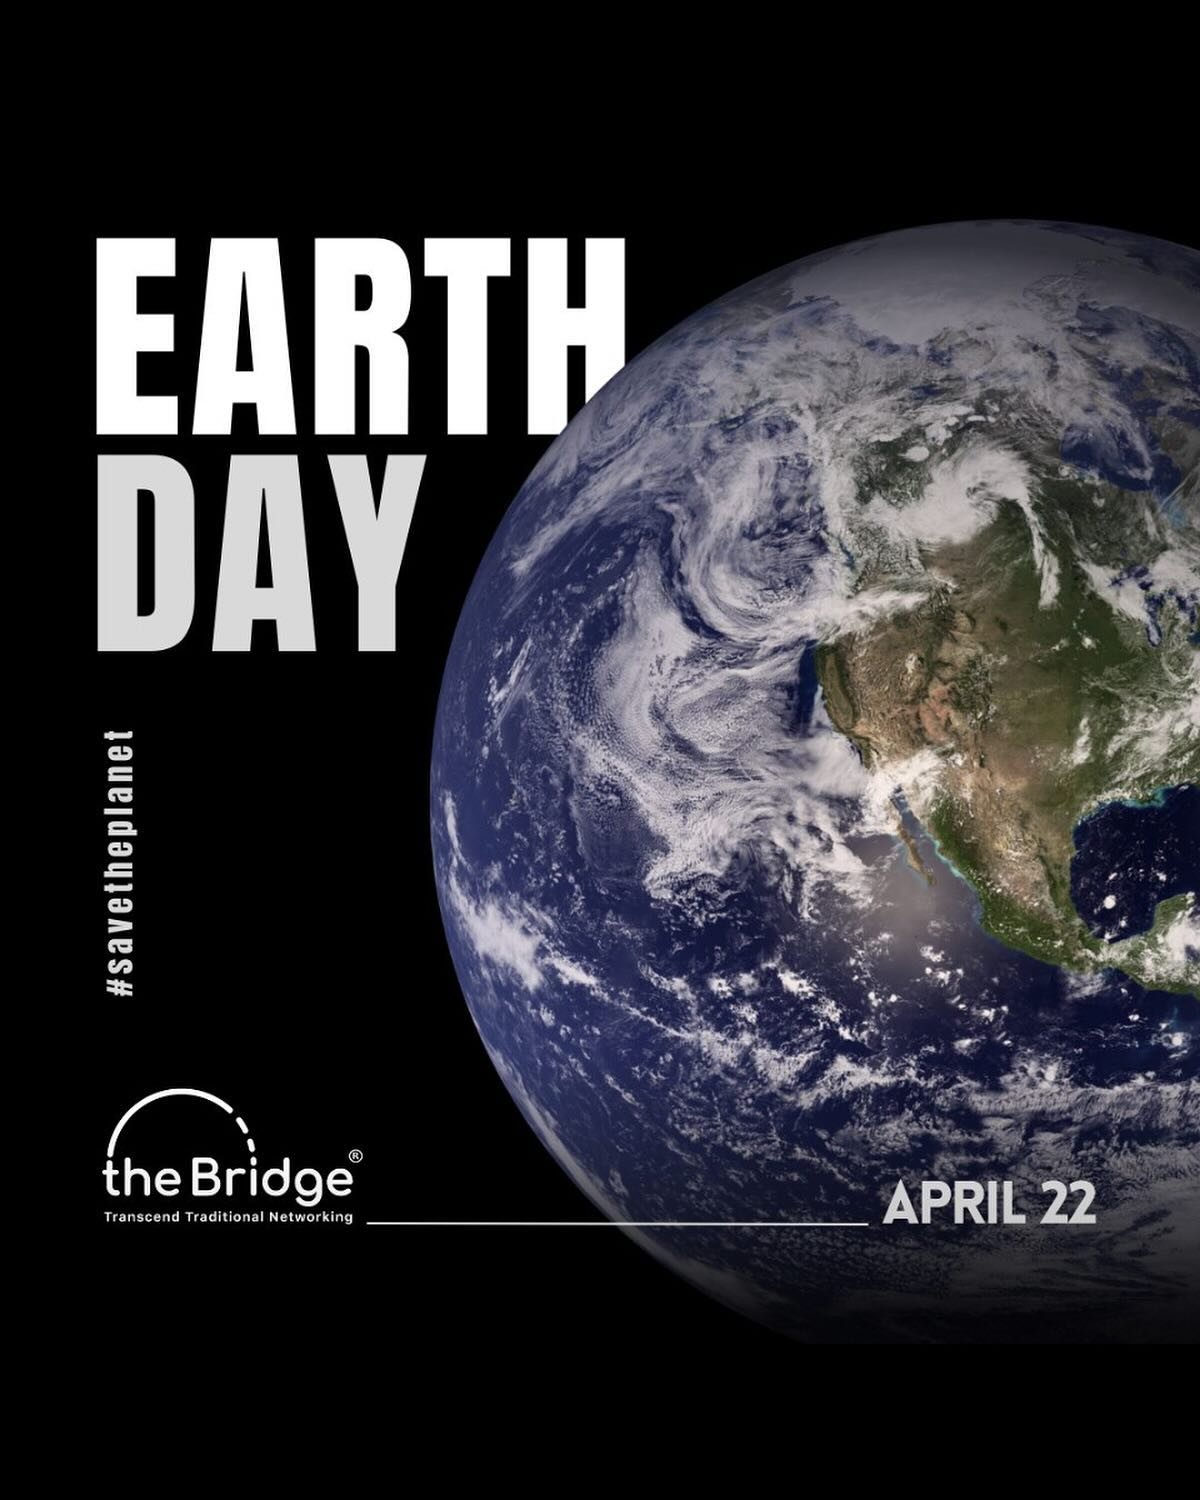 The Bridge celebrates 🌎 Earth Day that marks the 54th anniversary of the birth of the modern environmental movement to diversify, educate and activate the movement worldwide.&nbsp;#earthdayeveryday 
🌉 https://lnkd.in/et9D9JSG